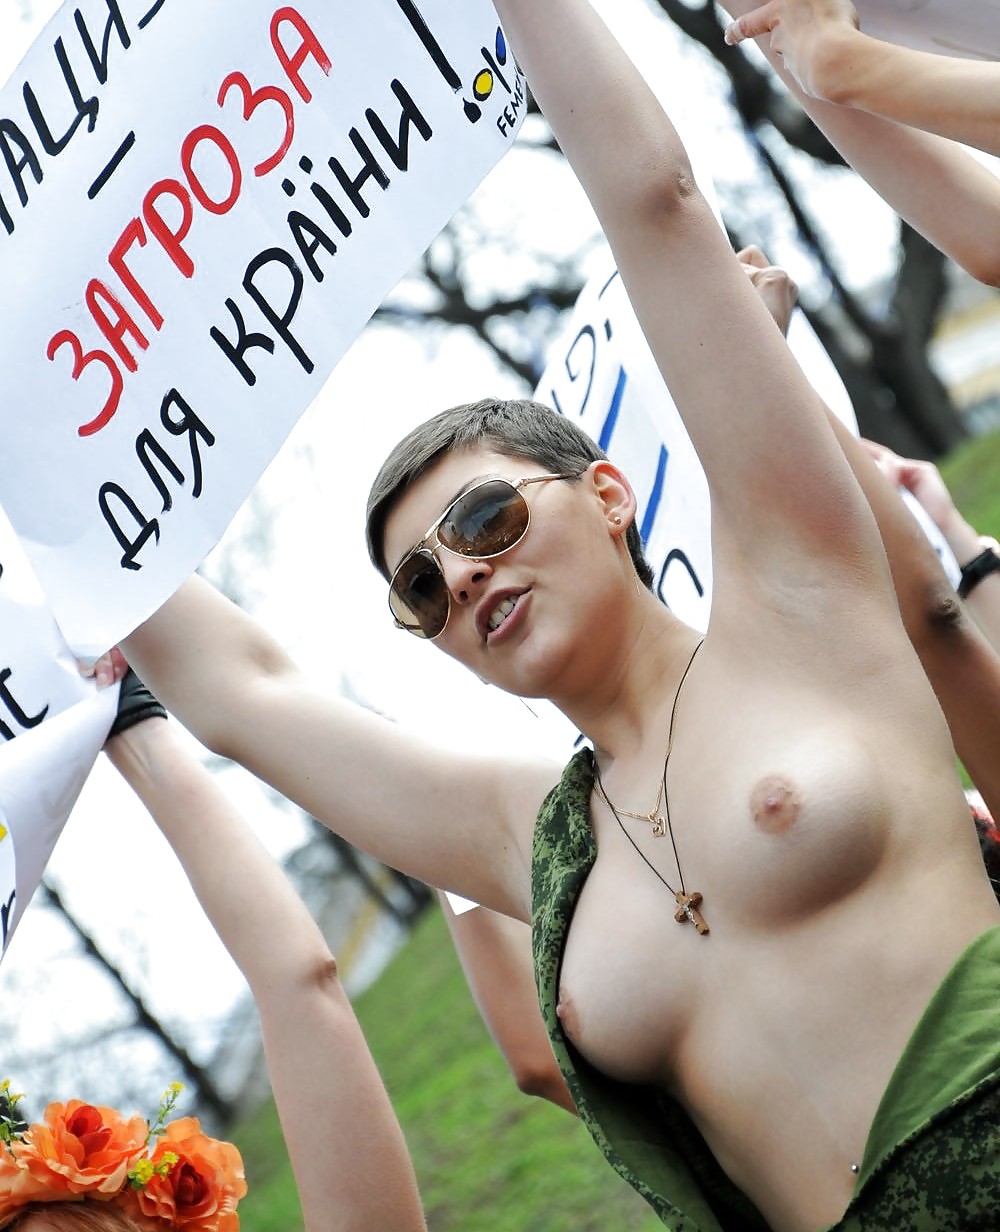 Hot female protesters porn gallery